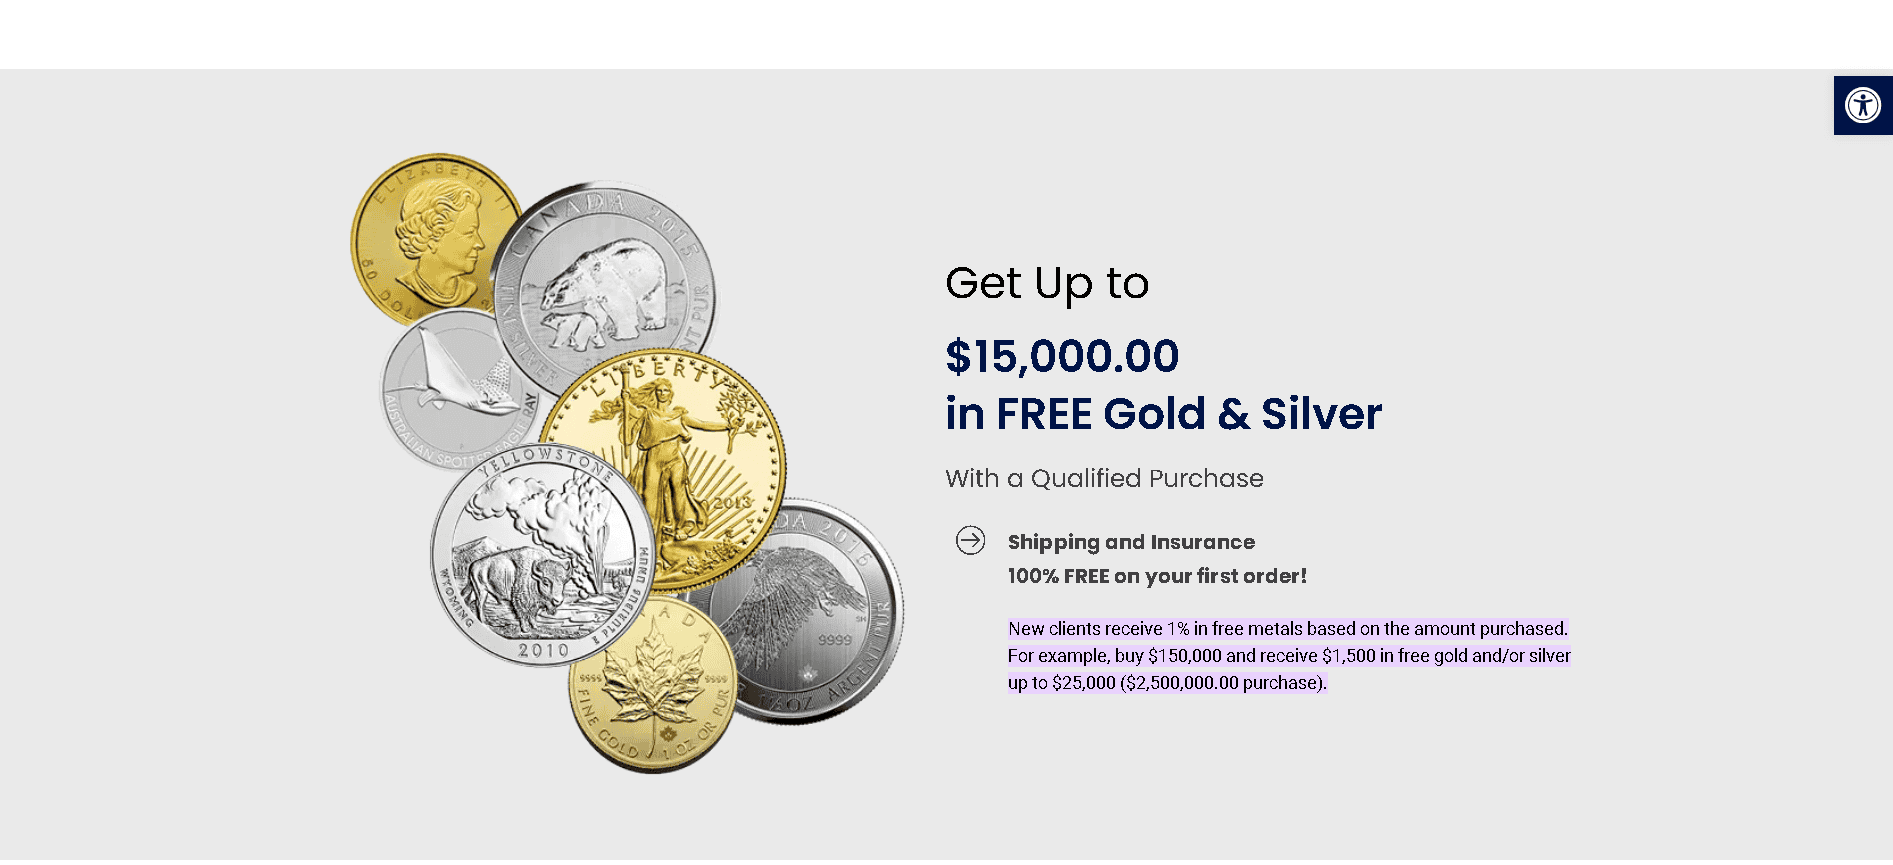 Preserve Gold offer free silver on qualified gold IRA purchases